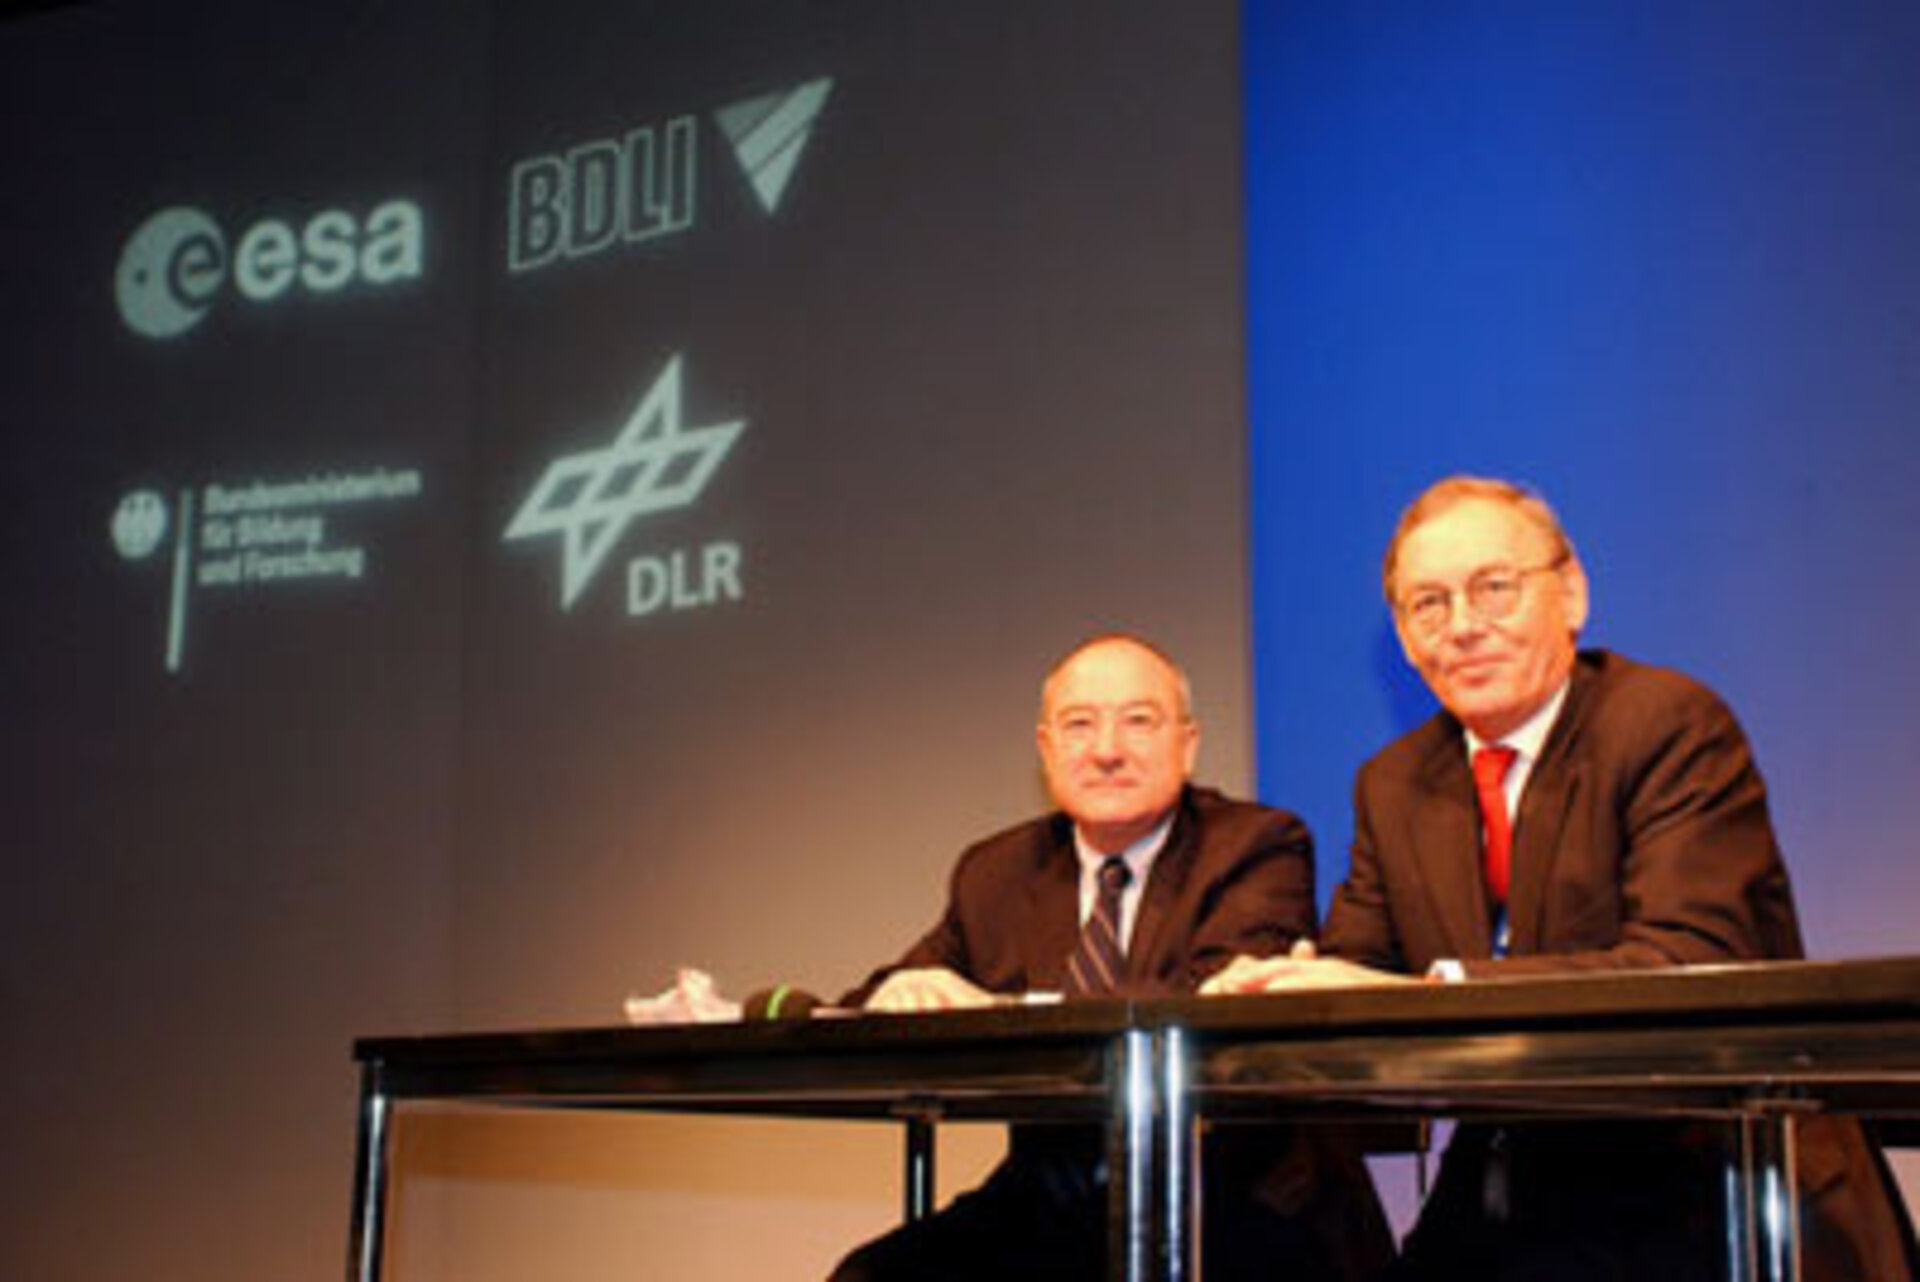 Sigmar Wittig (right) is the new Chair of the ESA Council